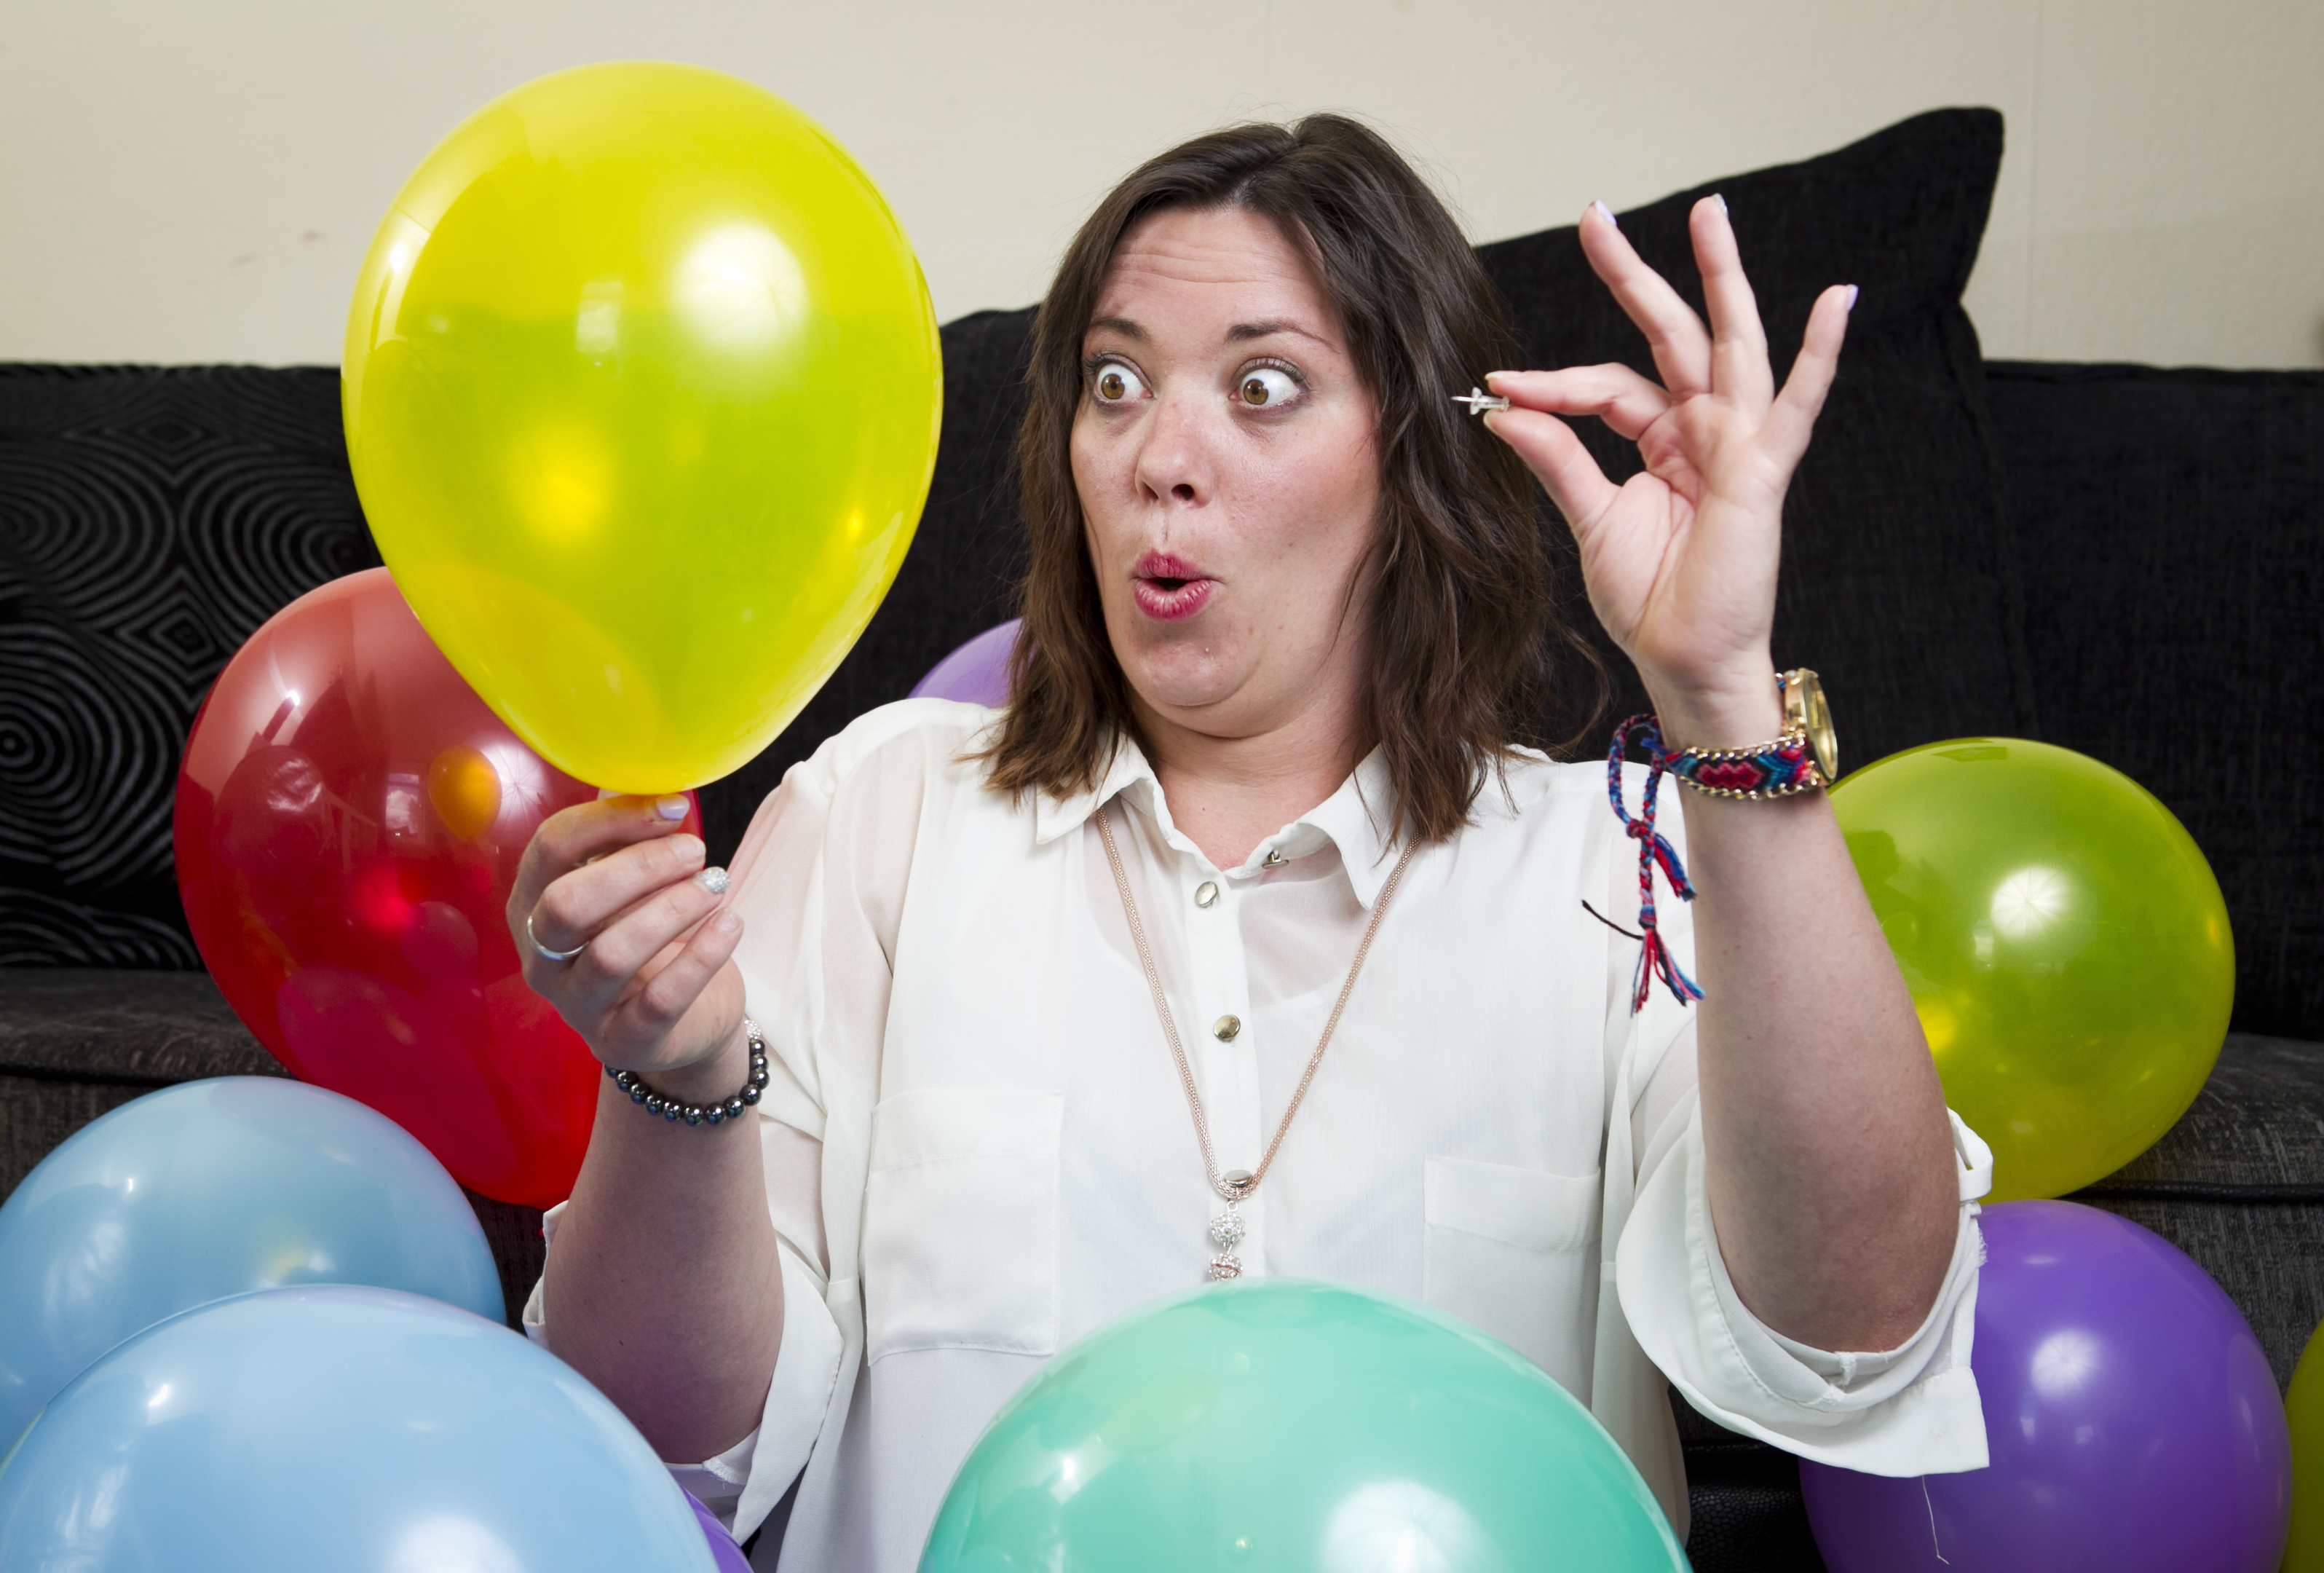 Woman with phobia of balloons finally bursts her fear - The Sunday Post.